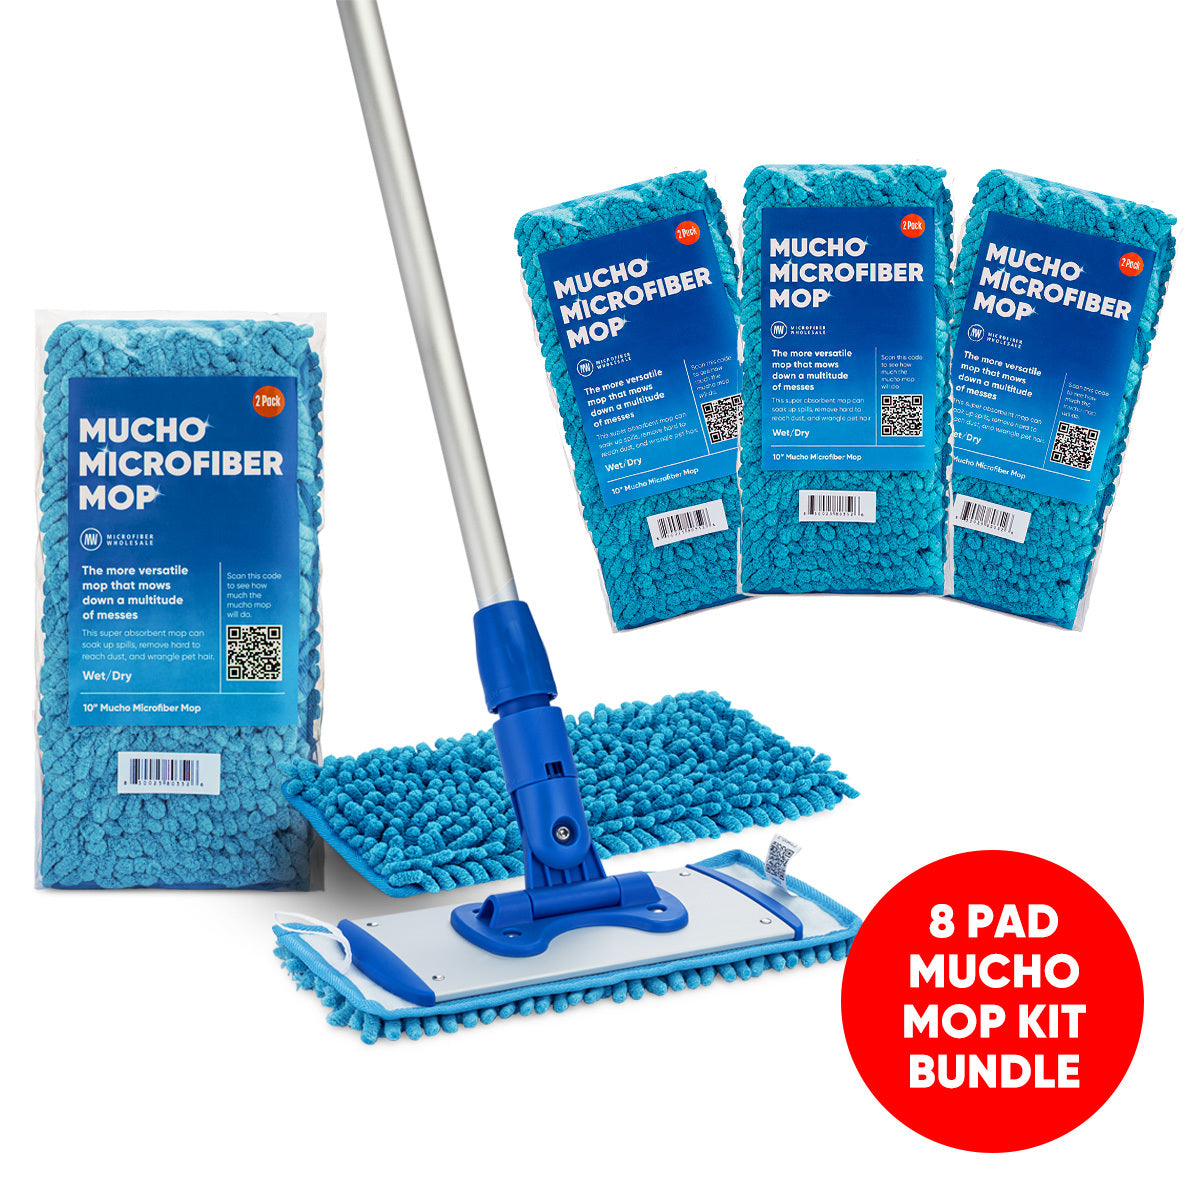 10" Mucho Mop mini kit with Extra Pads Bundle Kit